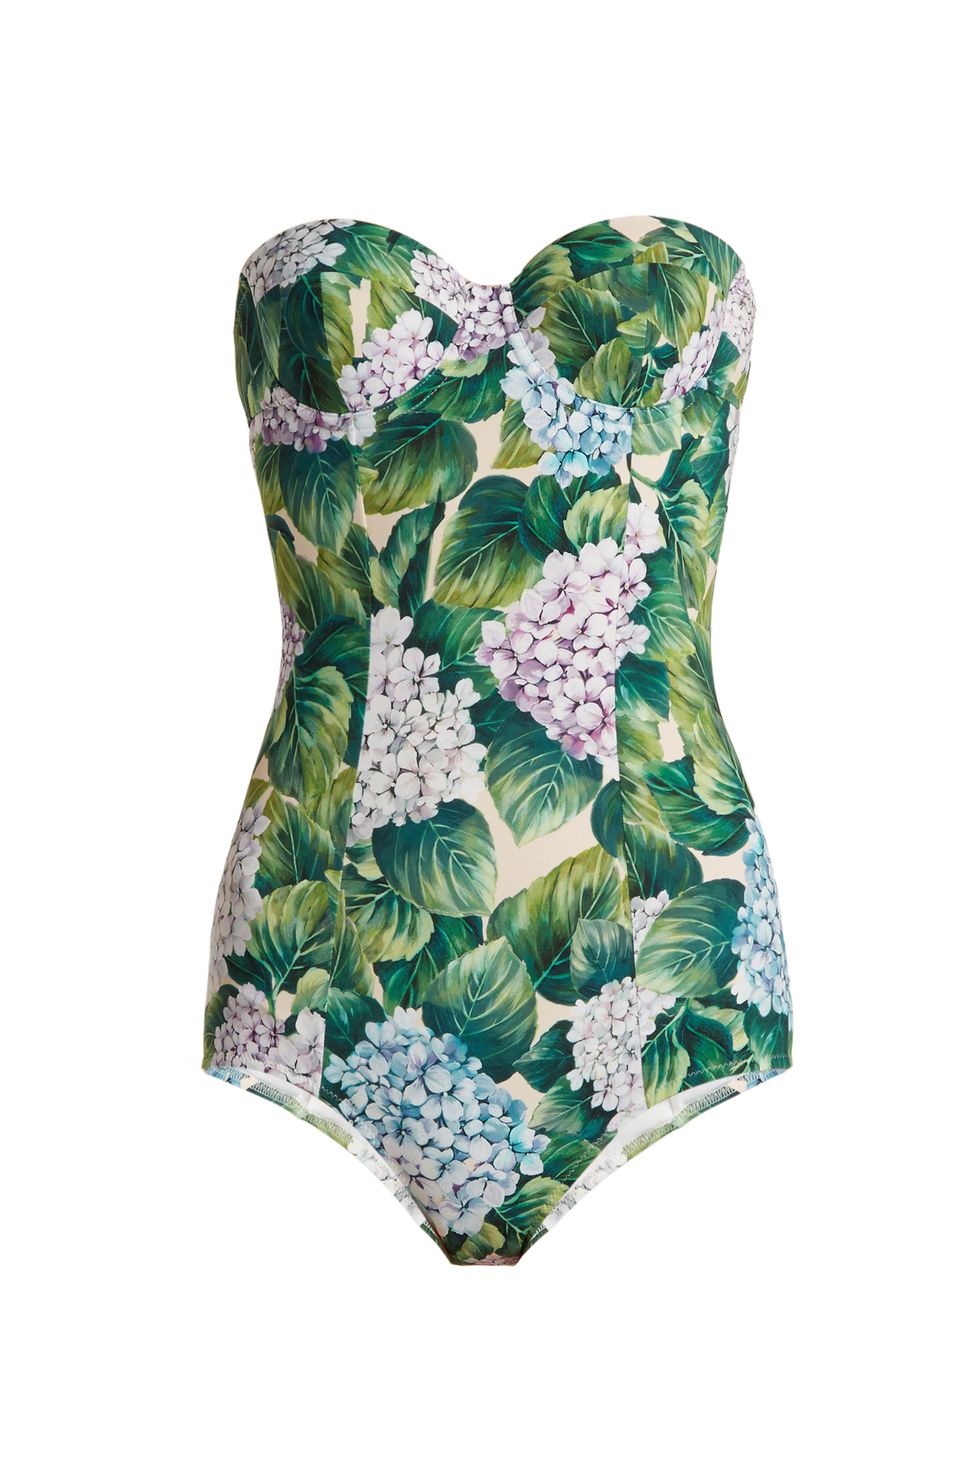 15 Vintage Swimsuits You Can Get in 2017 - Cute Retro Style One Piece ...